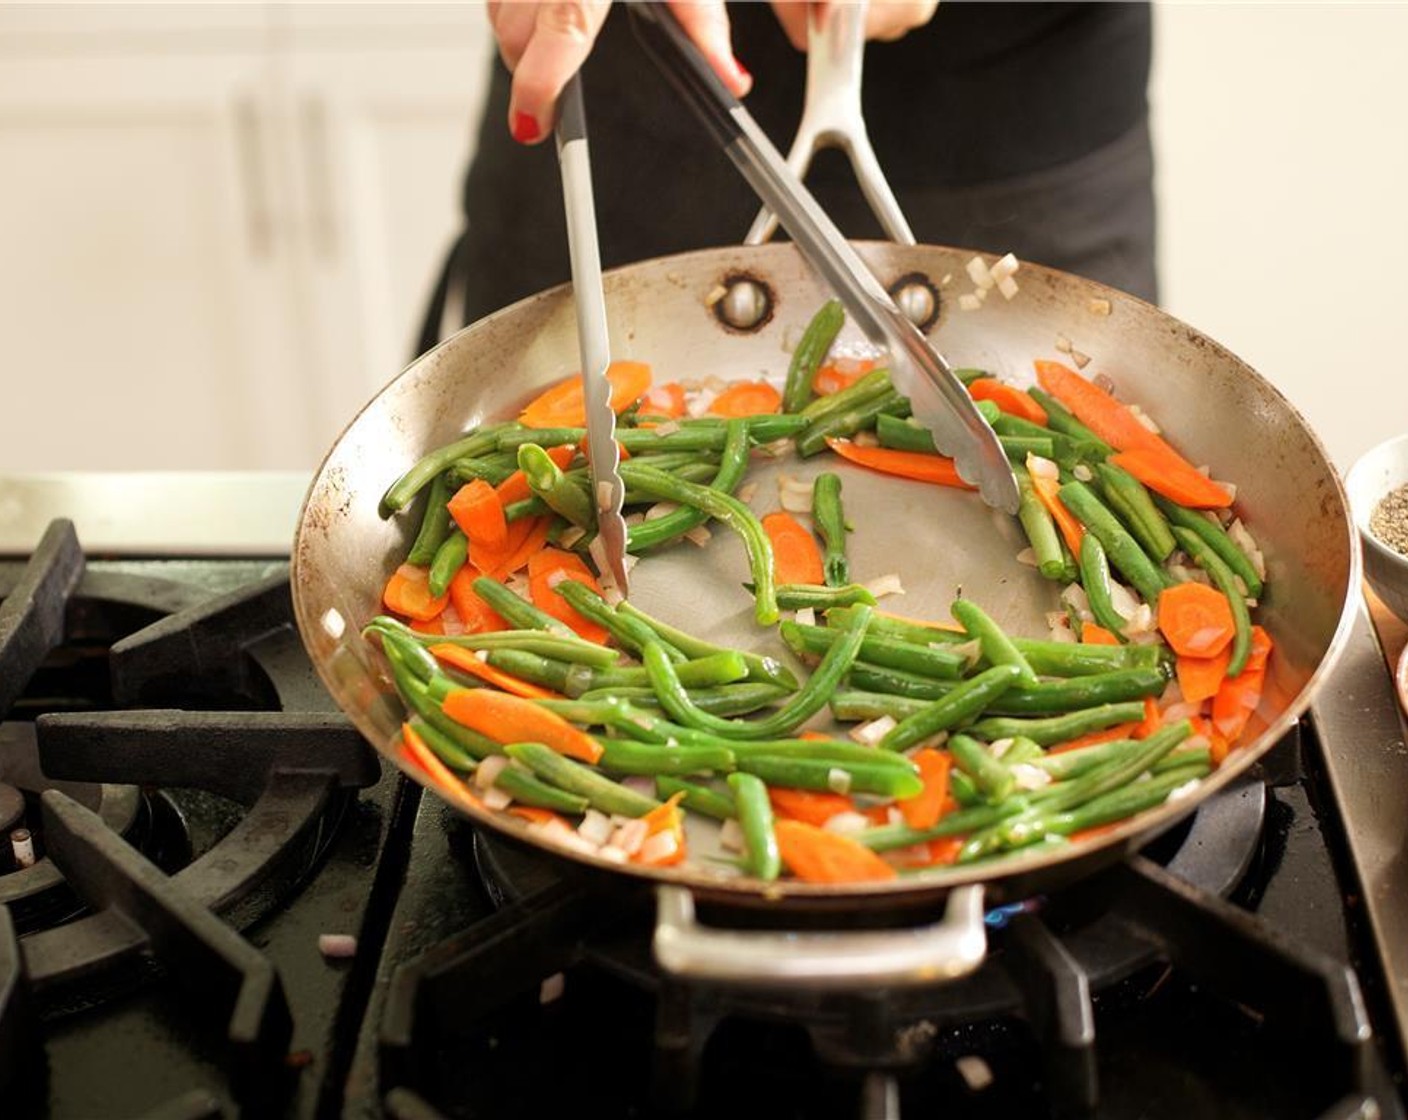 step 6 Heat a large saute pan over medium high heat. Add 1 tablespoon of olive oil to the pan, and when hot, add the green beans and saute for 3 minutes.